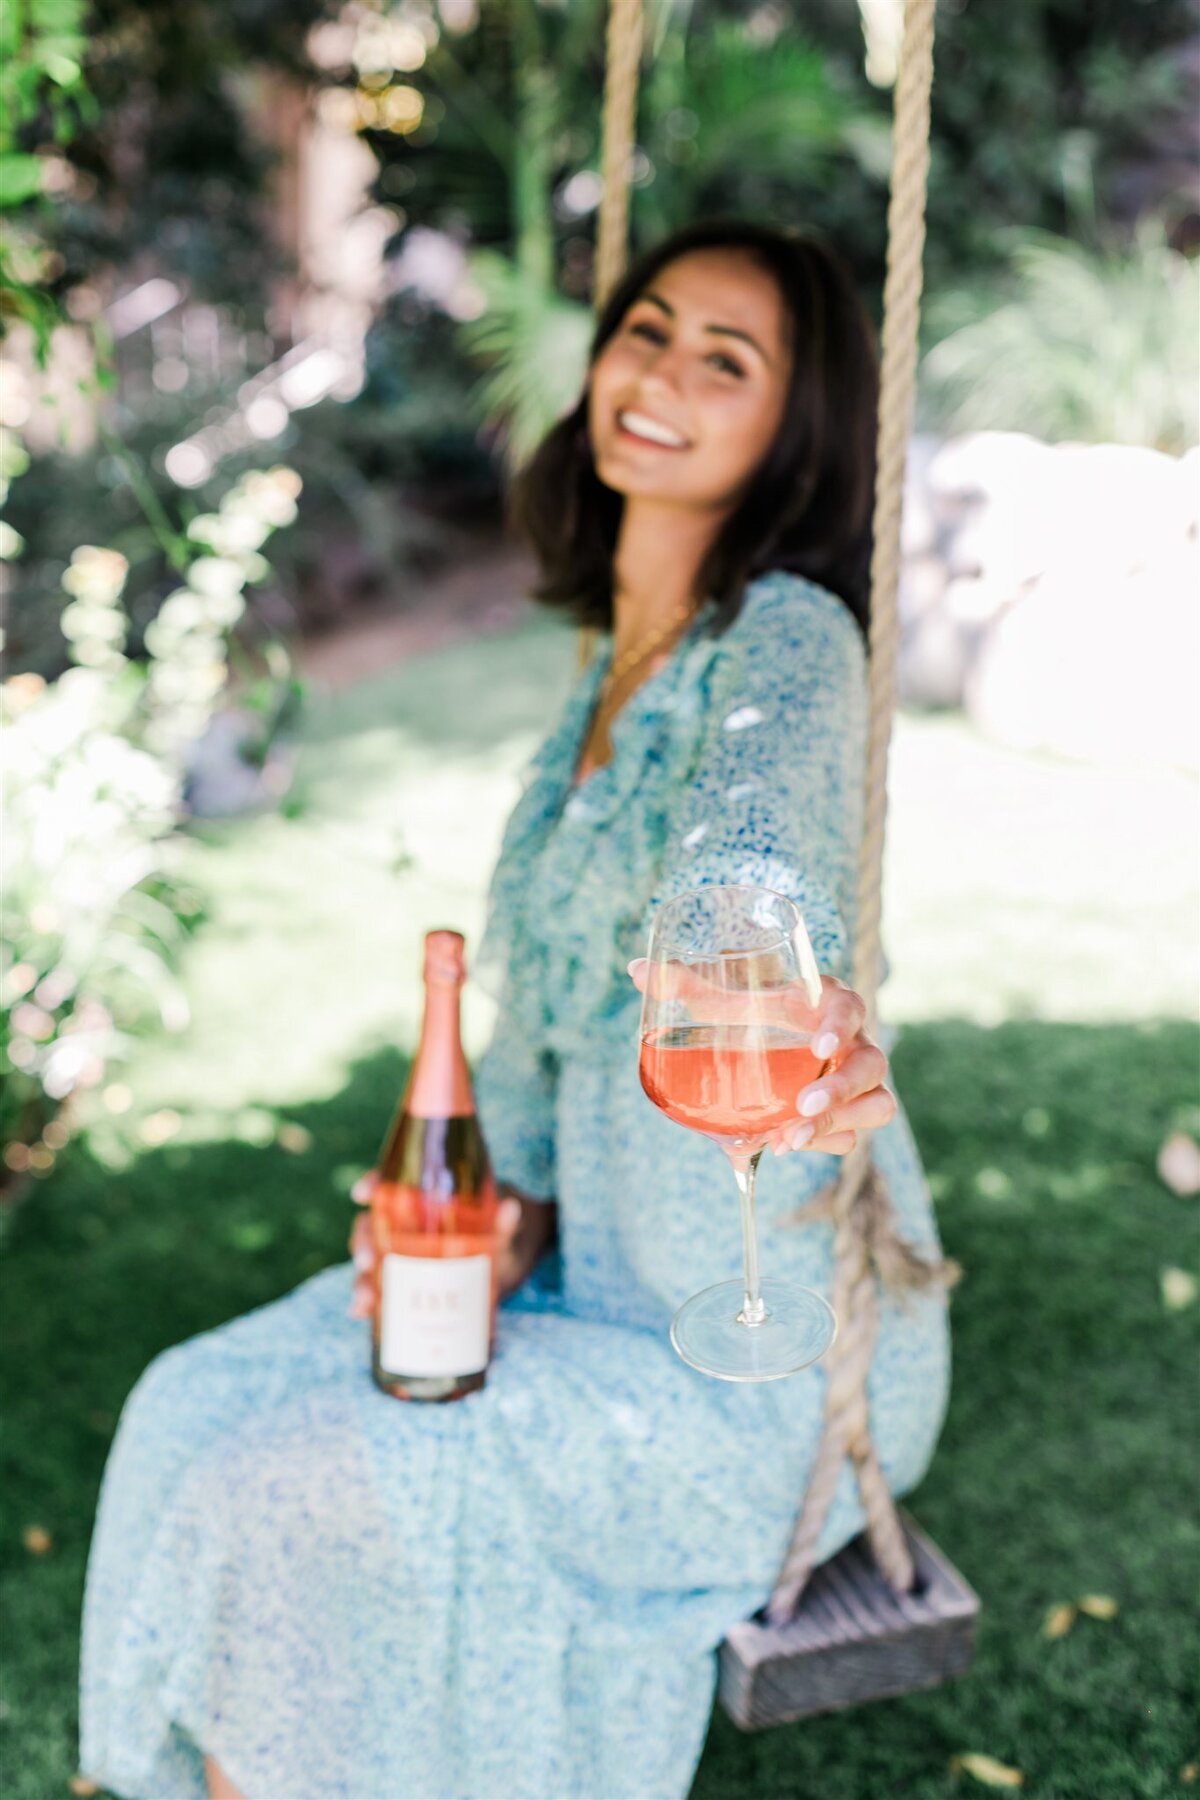 LVE Wines-Valorie Darling Photography-VKD10961